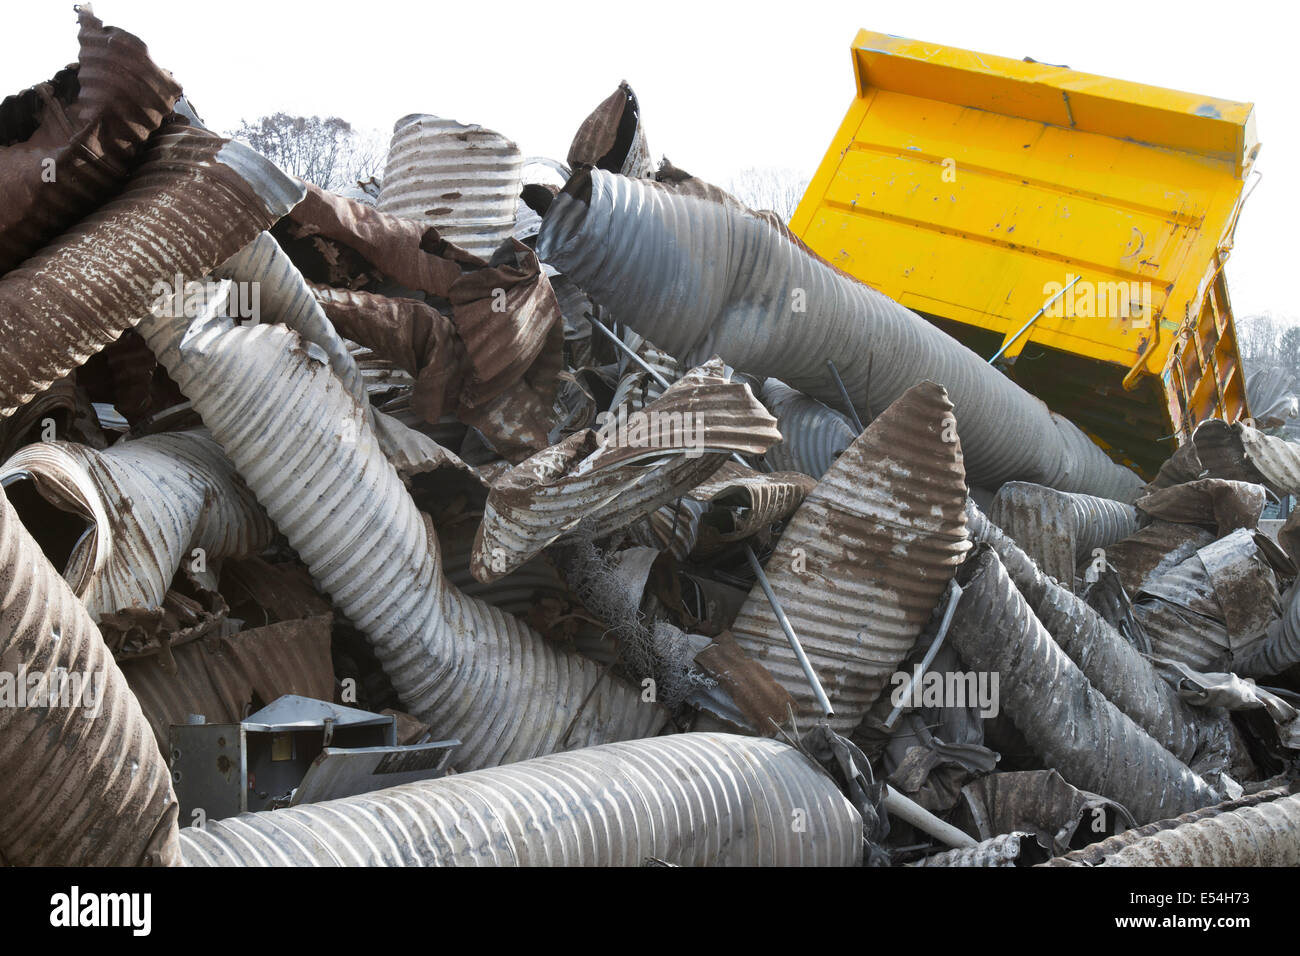 Scrap heap of rusting discarded drainage pipes with yellow tractor wagon Stock Photo